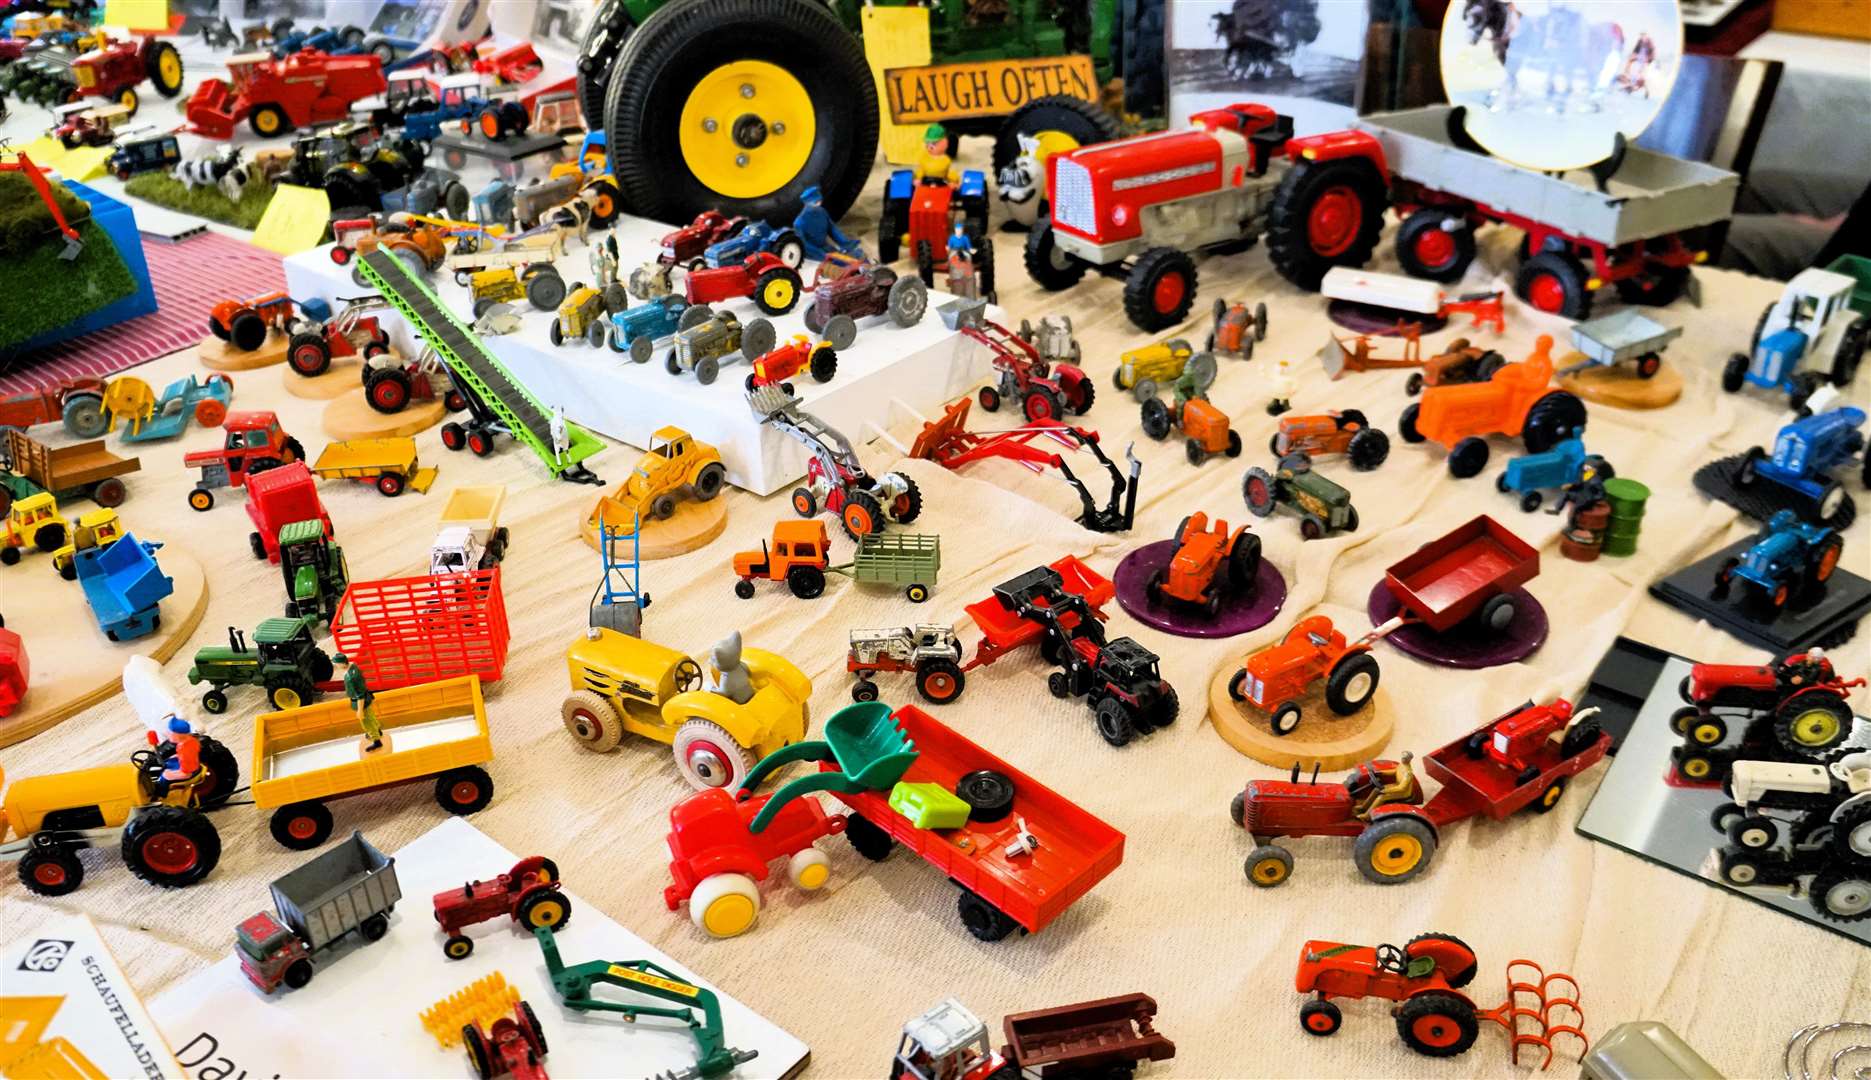 A colourful display of farm machinery. Picture: DGS